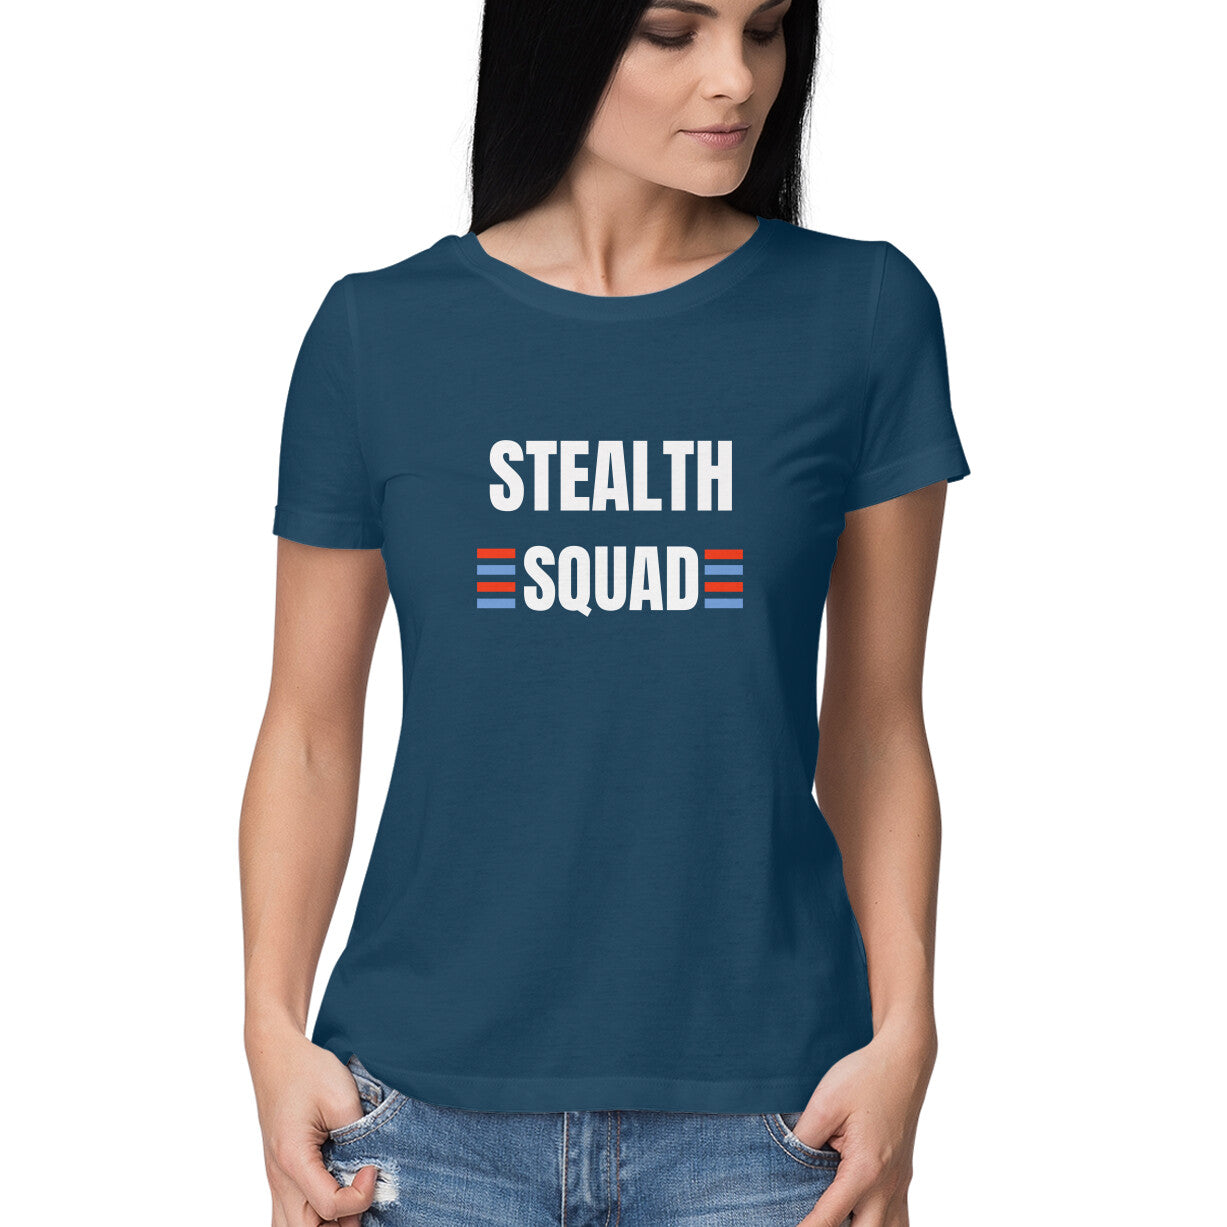 Stealth squad Women's tee